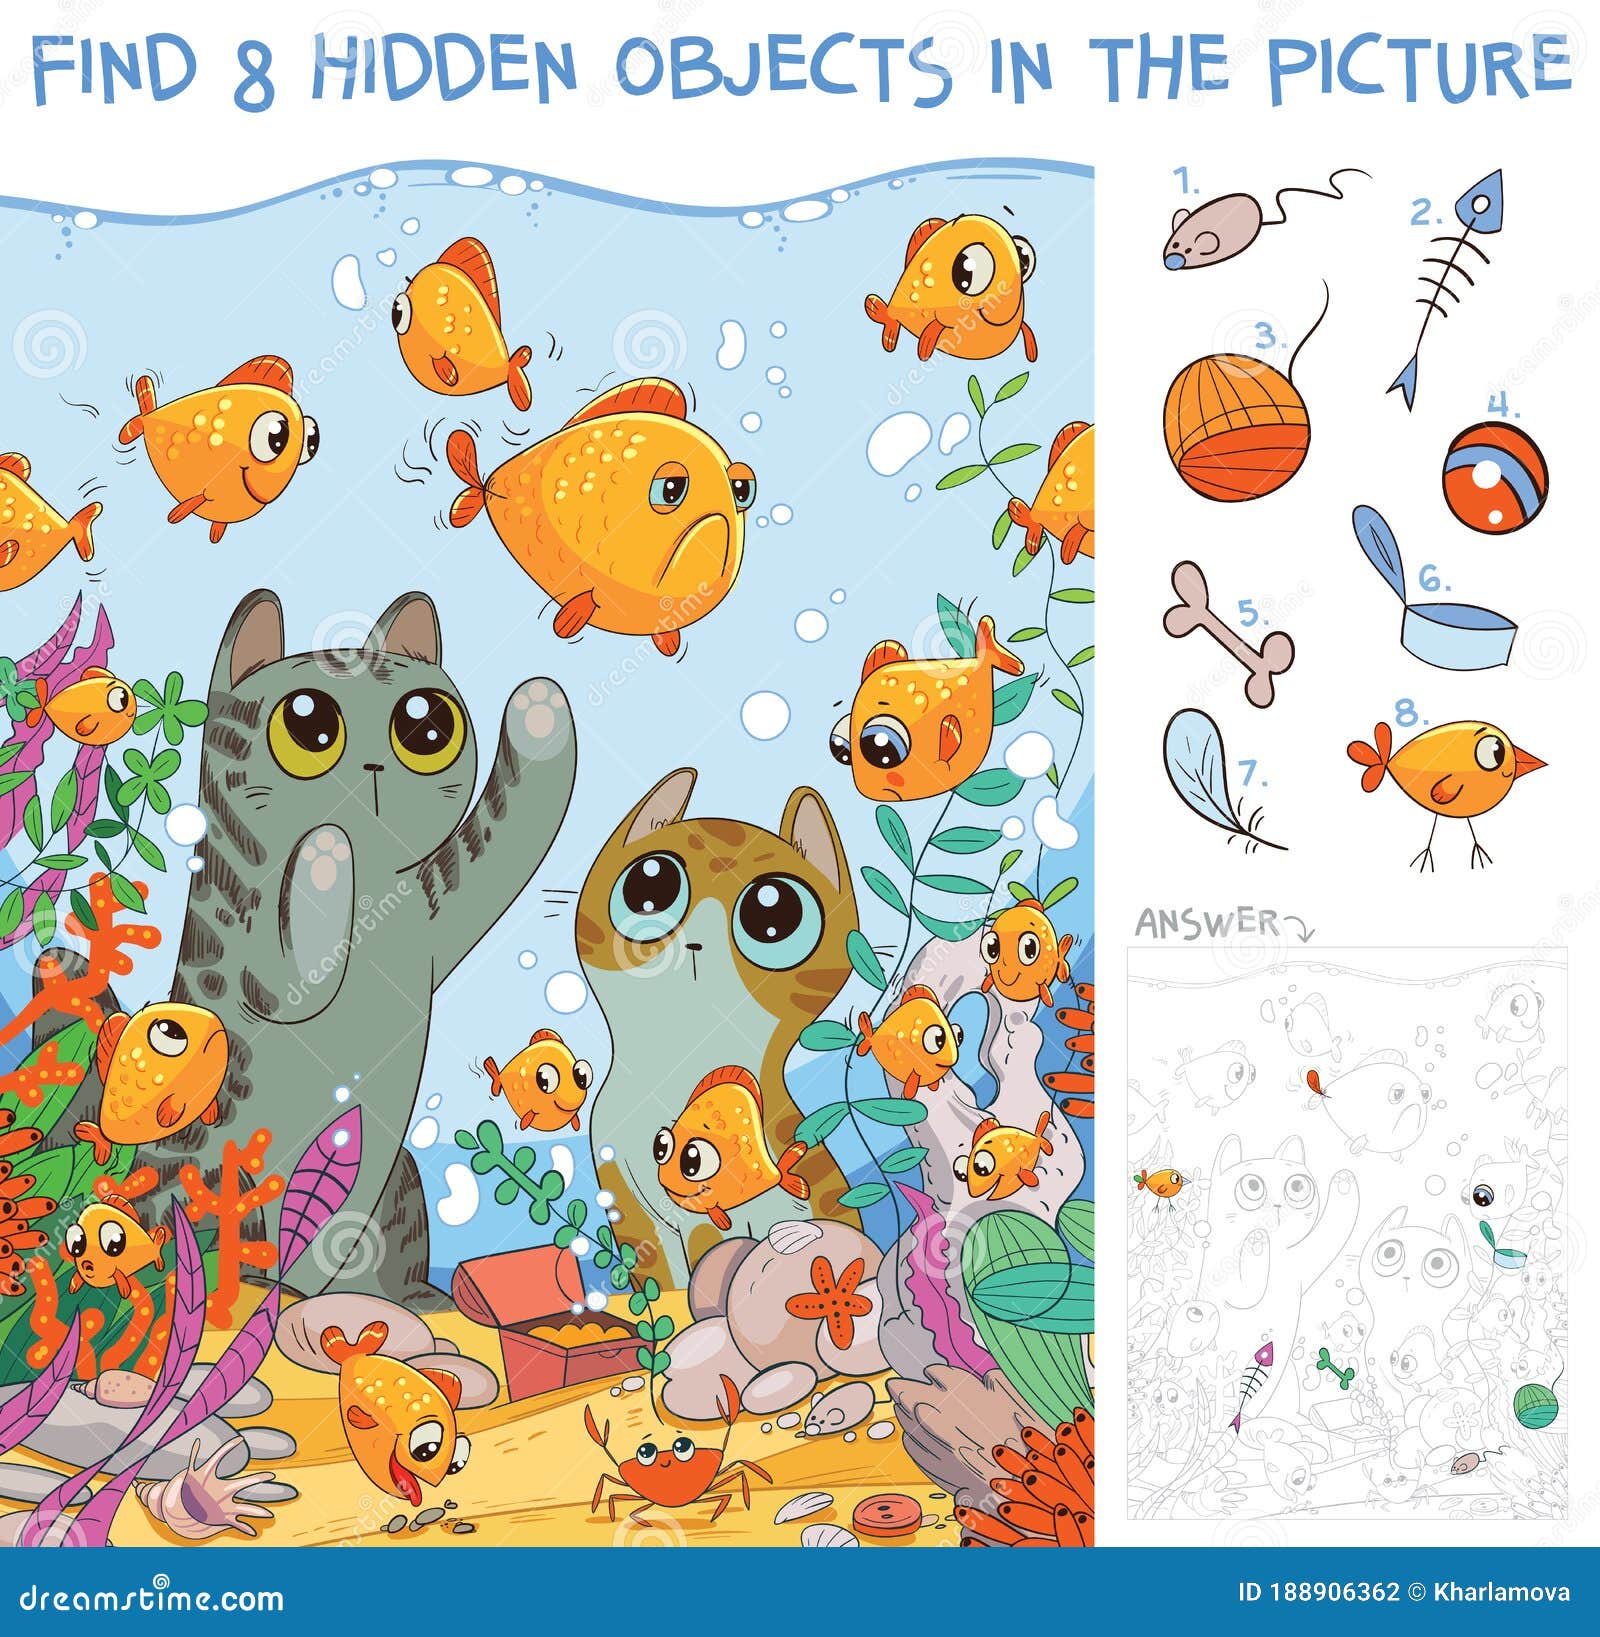 find hidden objects. cats looking at fish in an aquarium